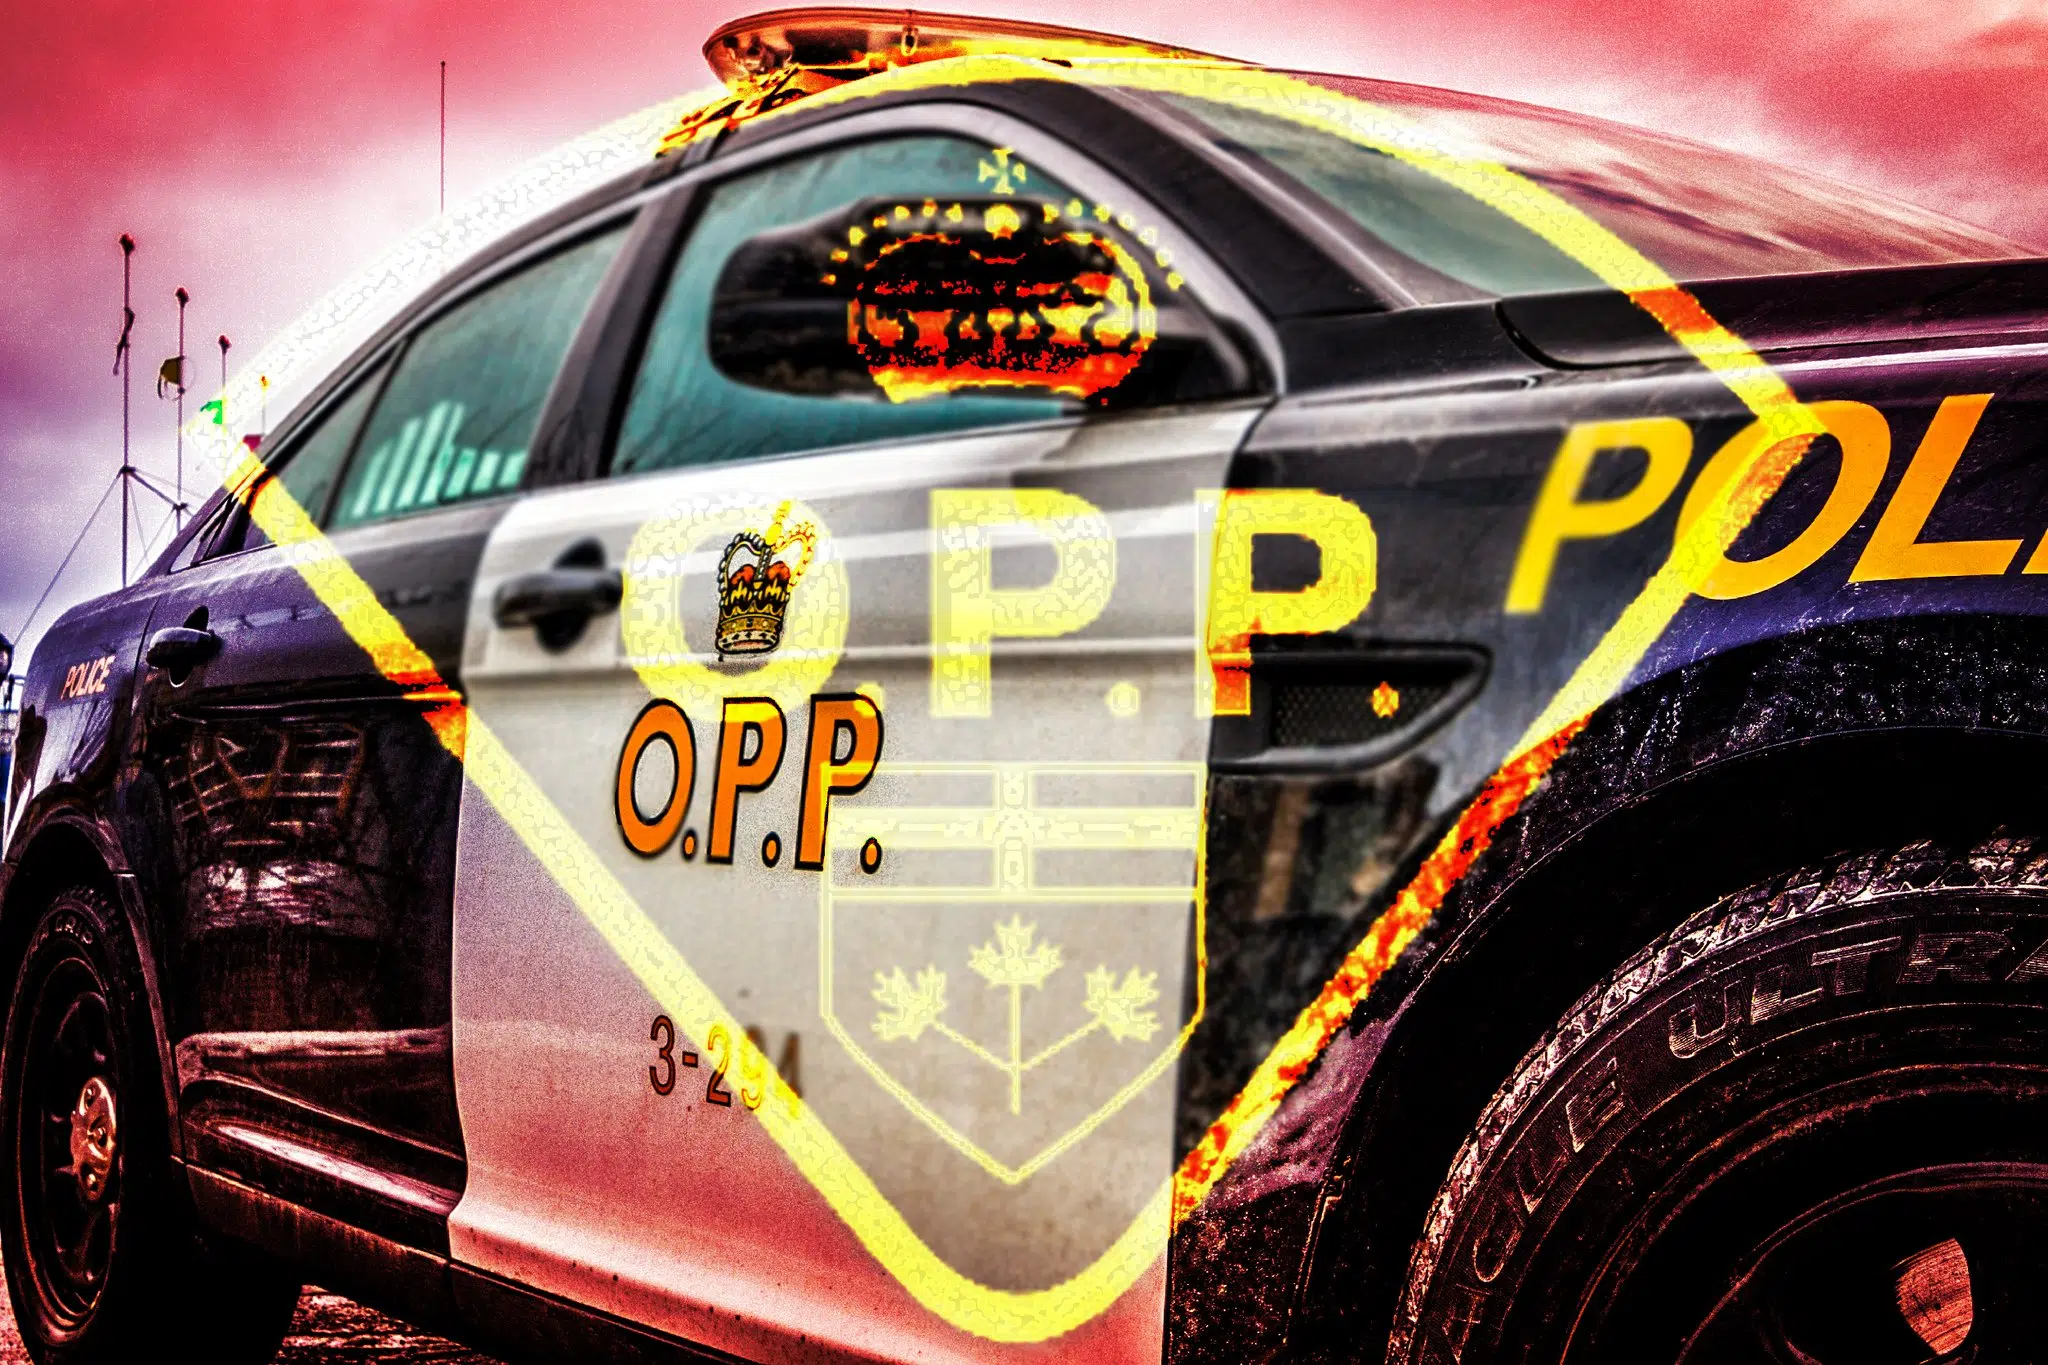 RELEASE: OPP investigating possible incident in Campbellford